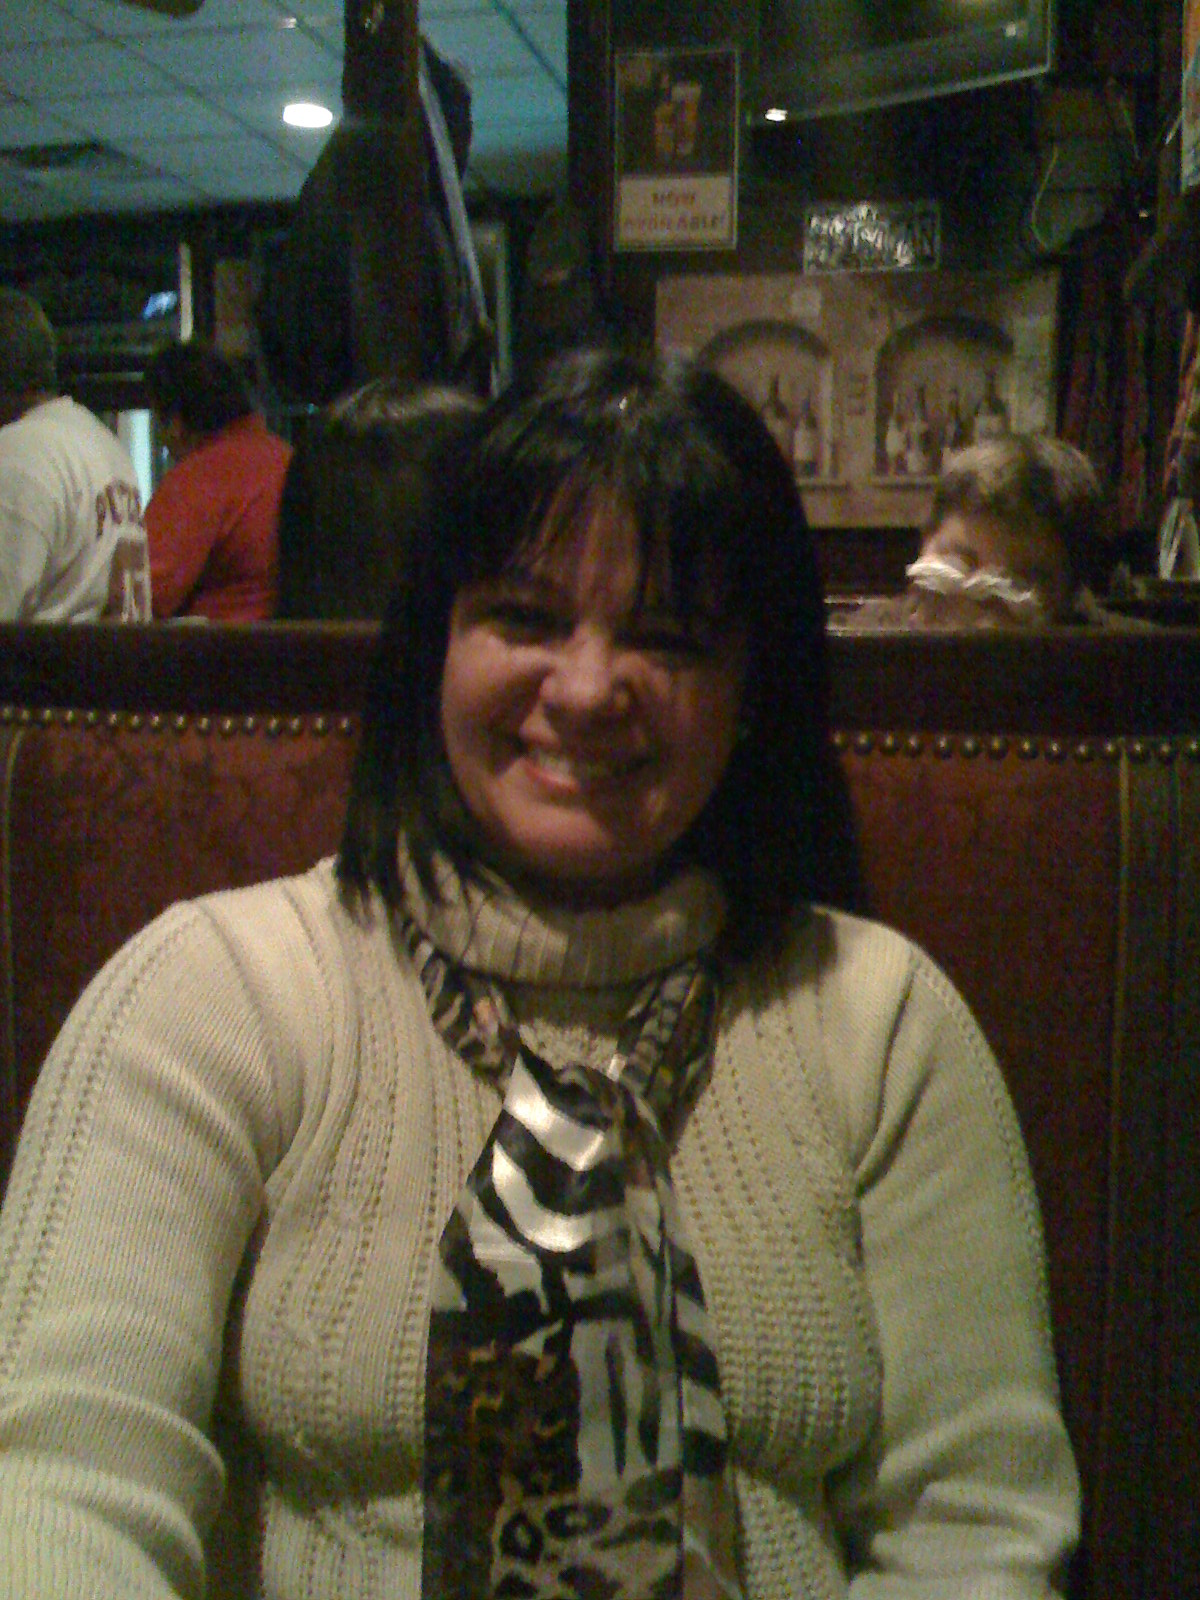 Helenice at Cassidy's in Astoria Queens